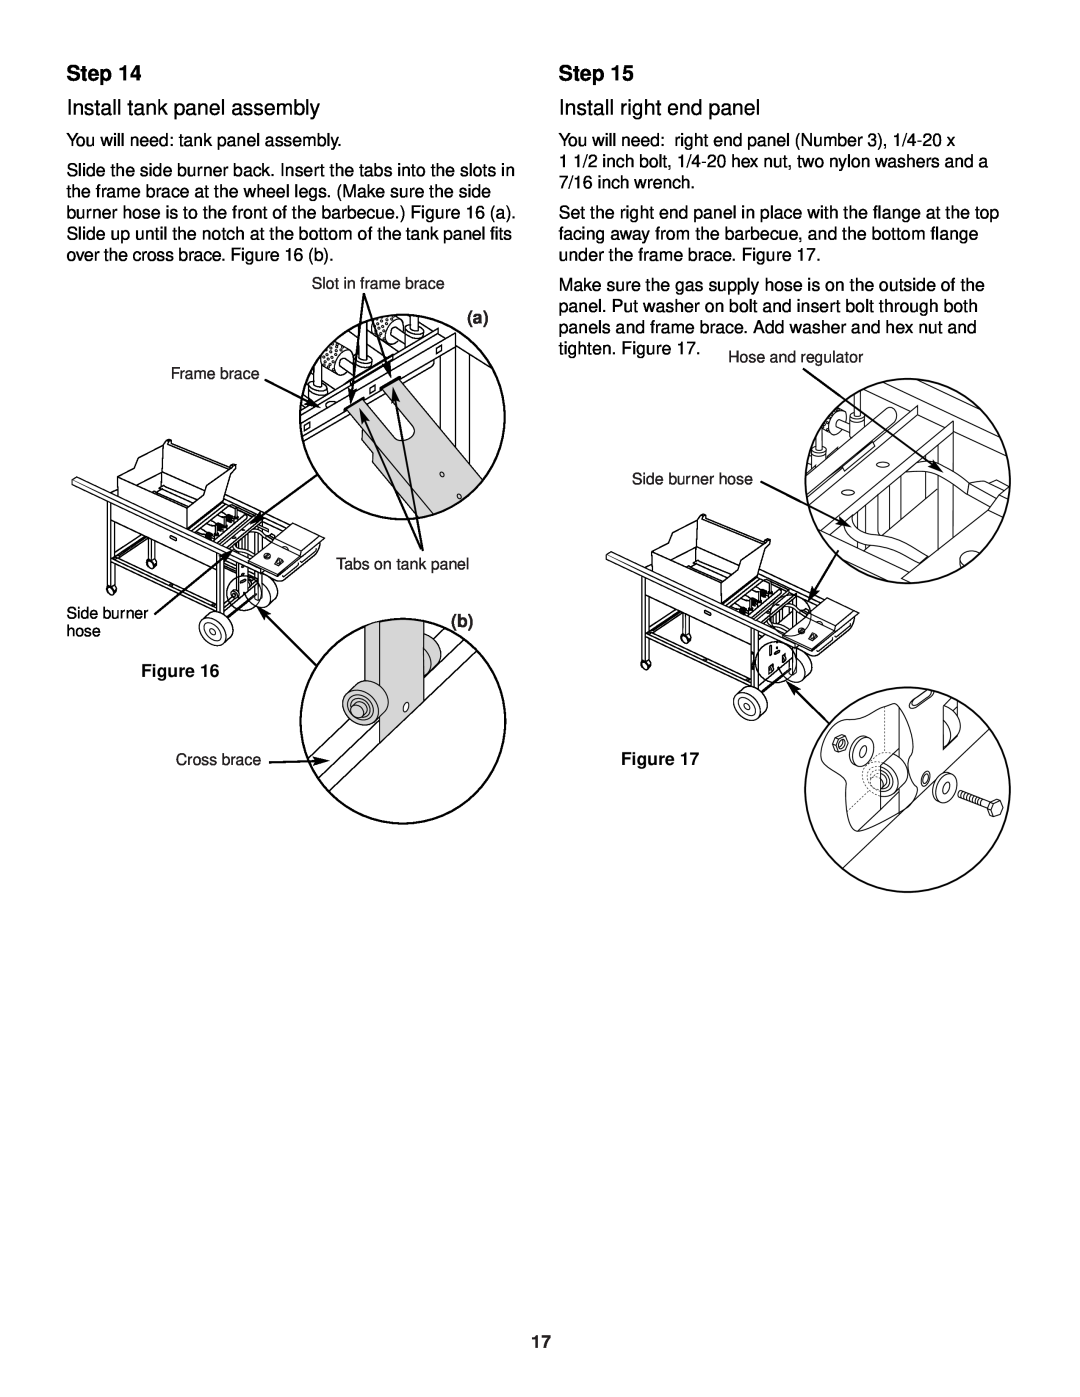 Weber 3400 Series owner manual Step, Install tank panel assembly, Install right end panel 